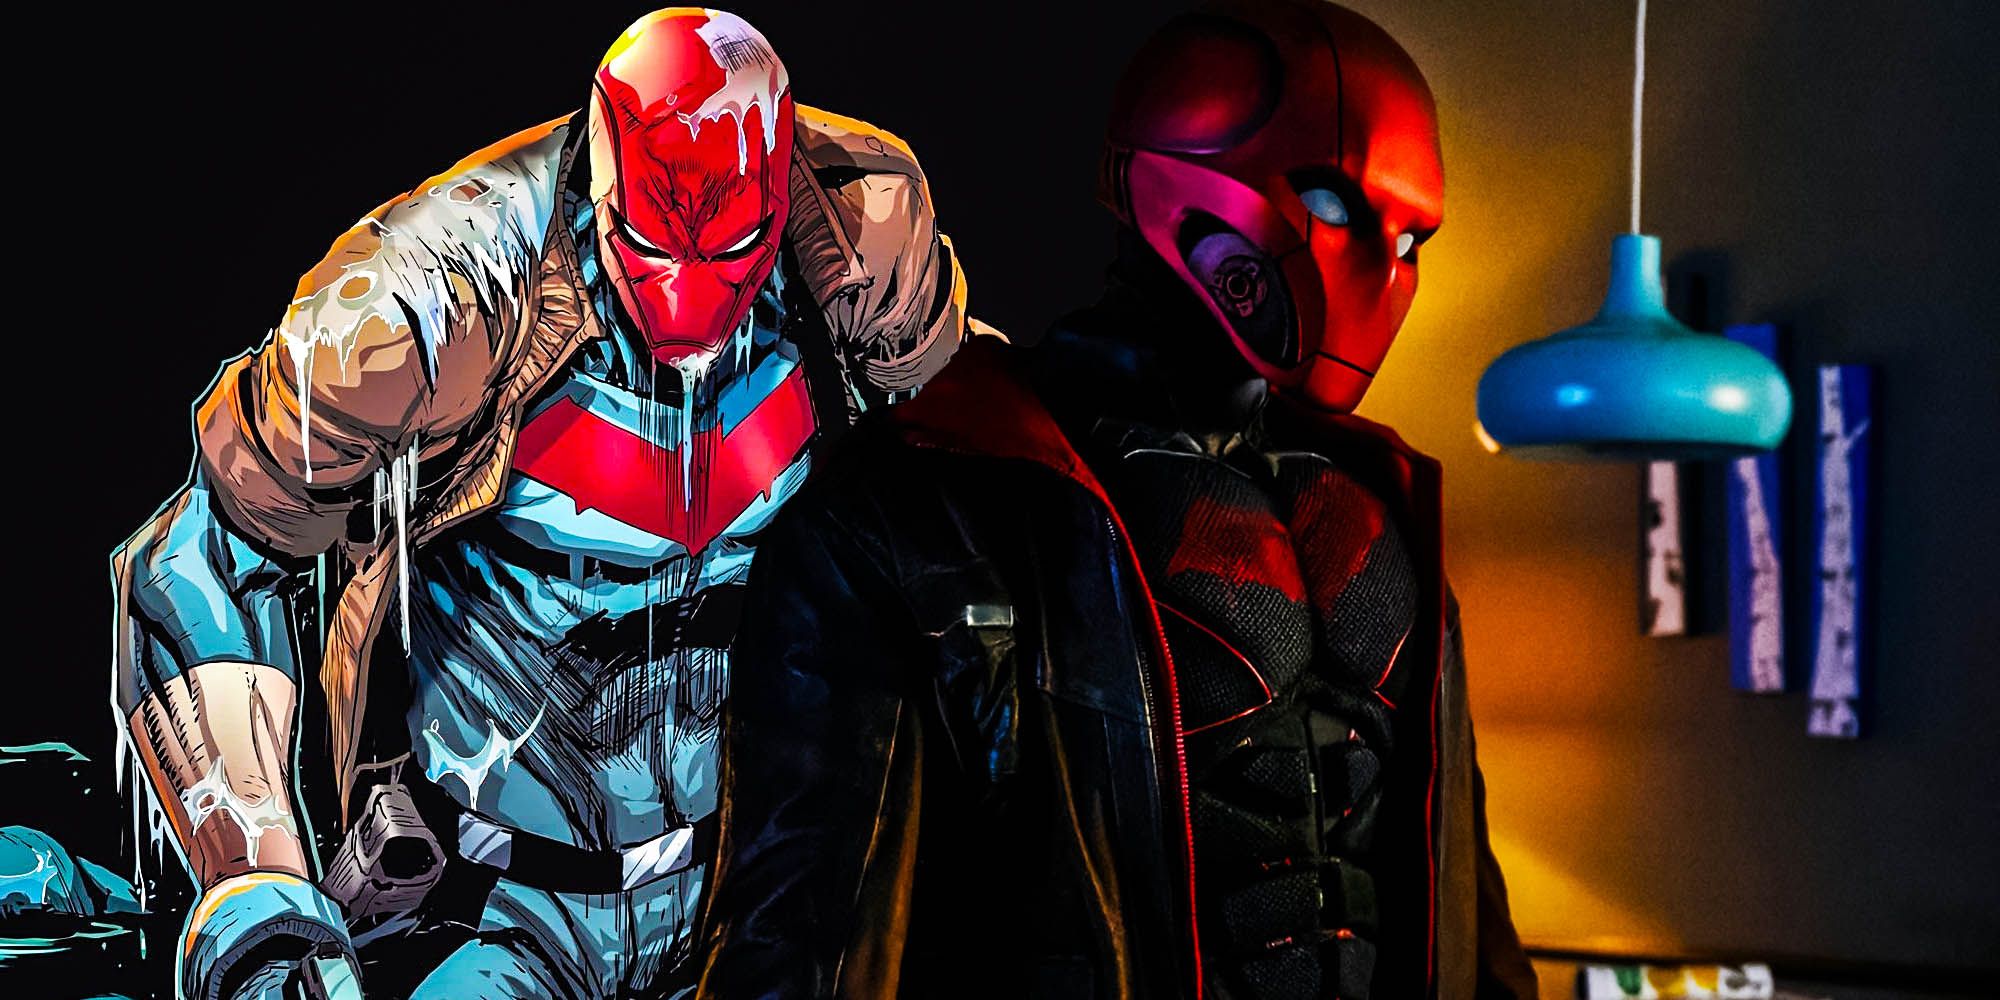 Titans Sets Up A Comic-Accurate Red Hood For Season 4